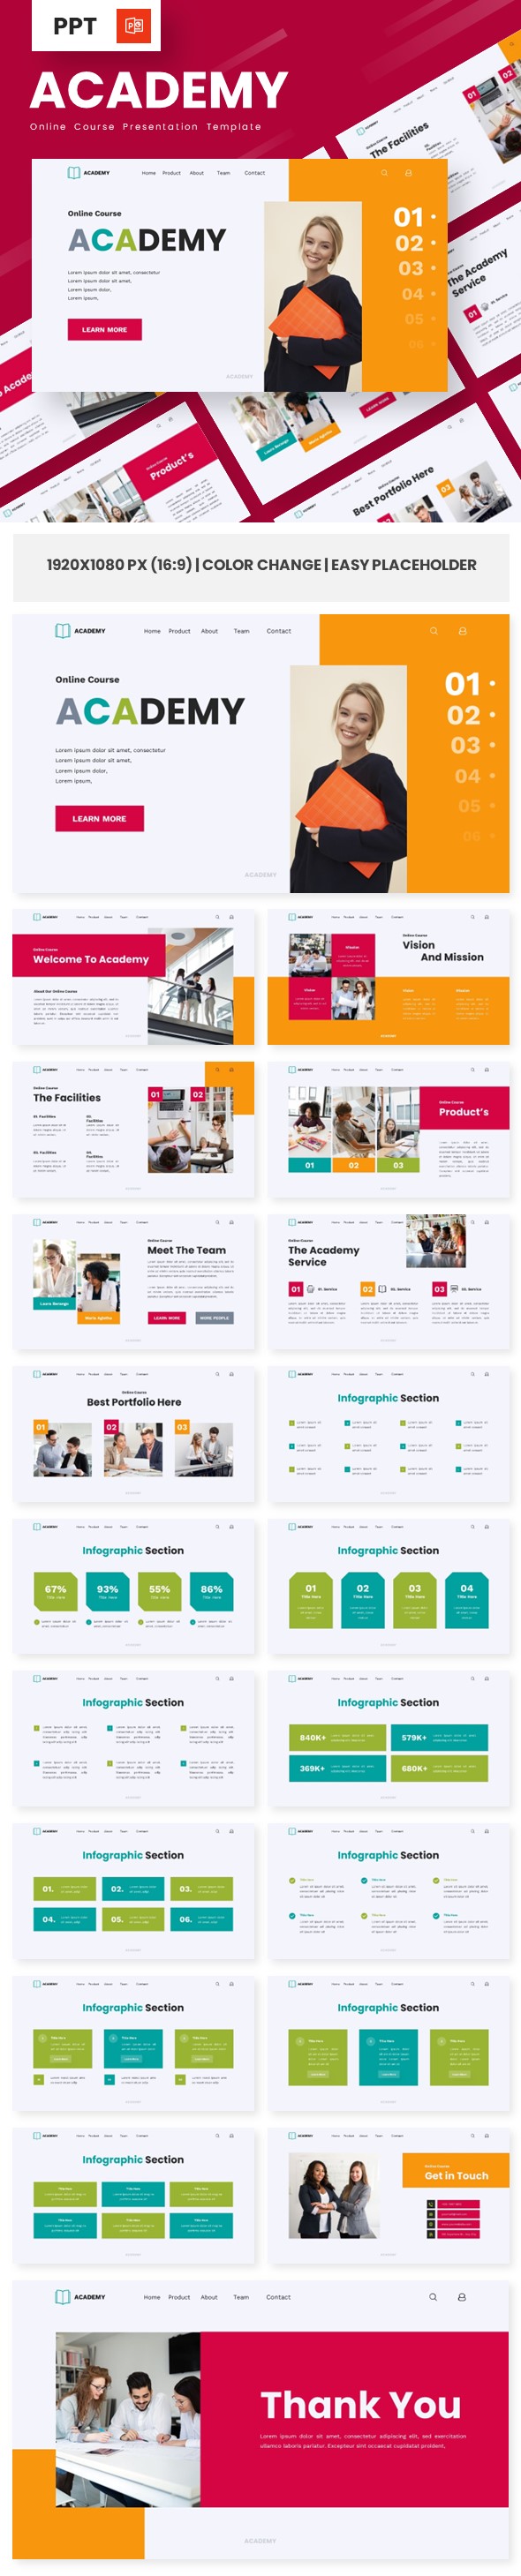 [DOWNLOAD]Academy - Online Course Powerpoint Templates